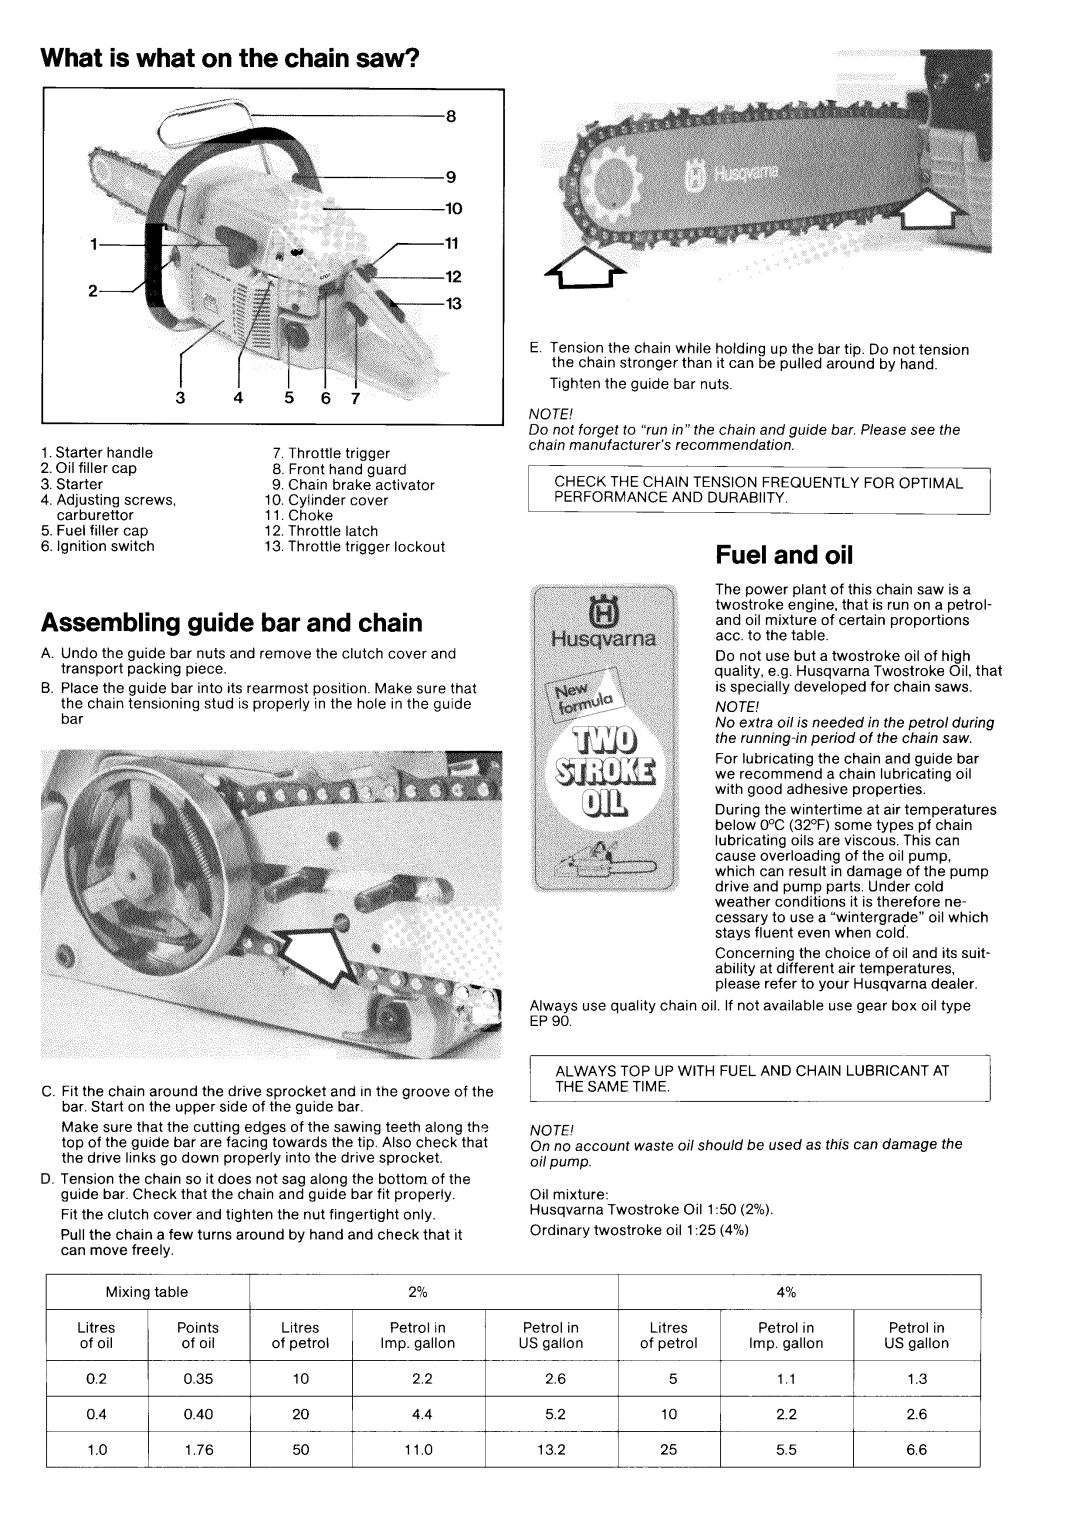 Husqvarna 266 manual What is what on the chain saw?, Assembling guide bar and chain, Fuel and oil, 0.35, 0.40, Note 